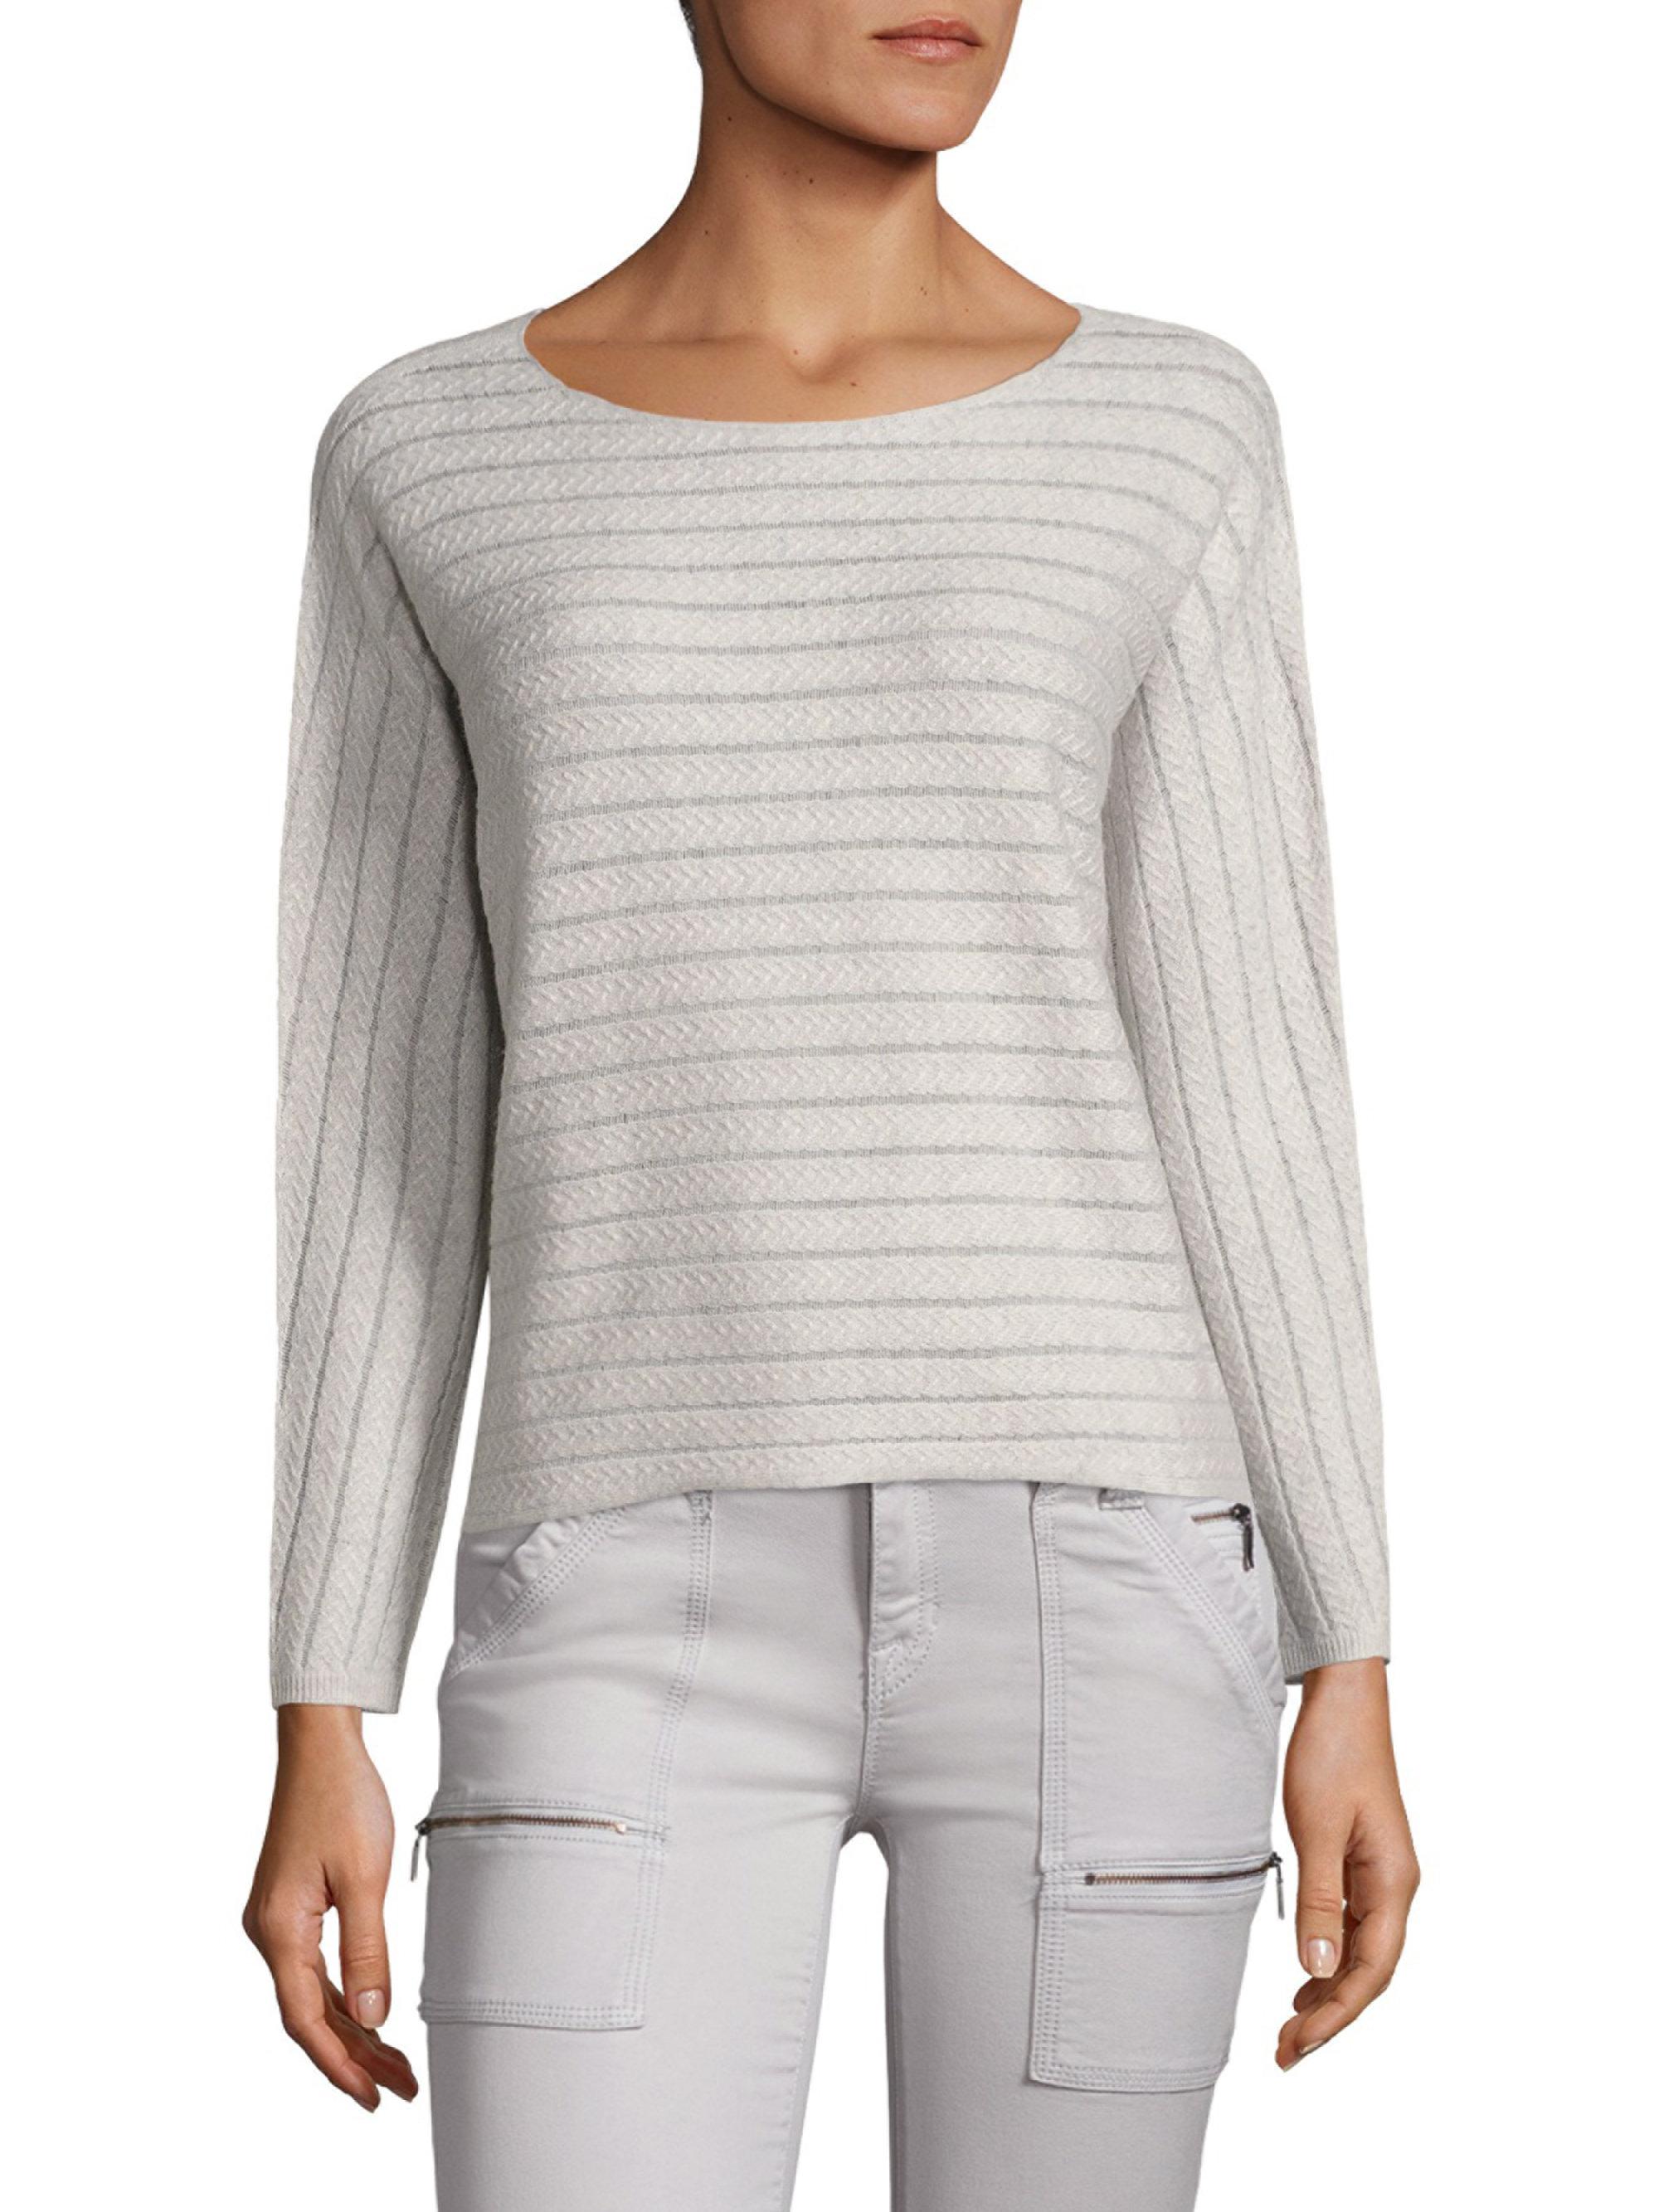 Lyst - Joie Cashmere Blend Kerenza Sweater in Gray